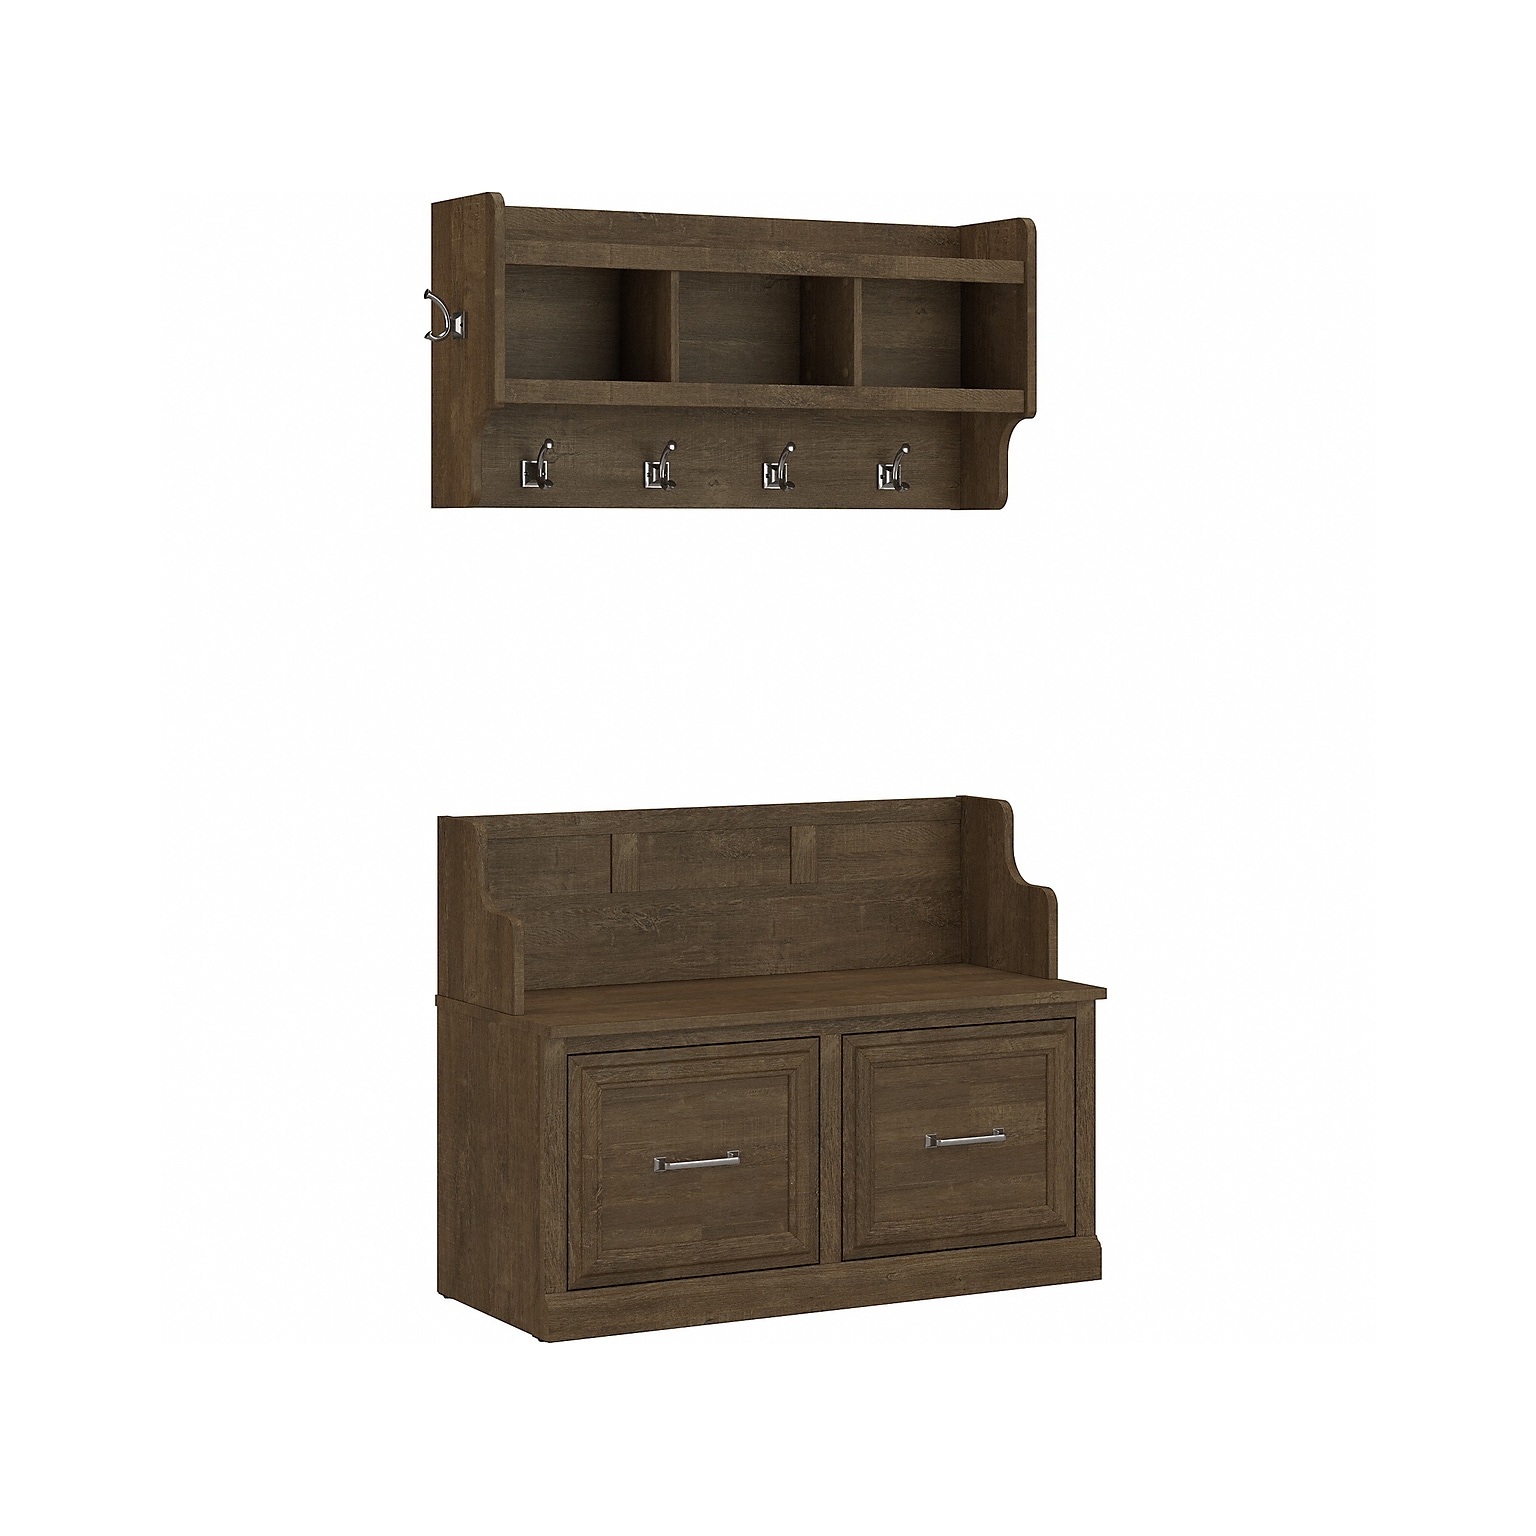 Bush Furniture Woodland 40W Entryway Bench with Doors and Wall Mounted Coat Rack, Ash Brown (WDL009ABR)